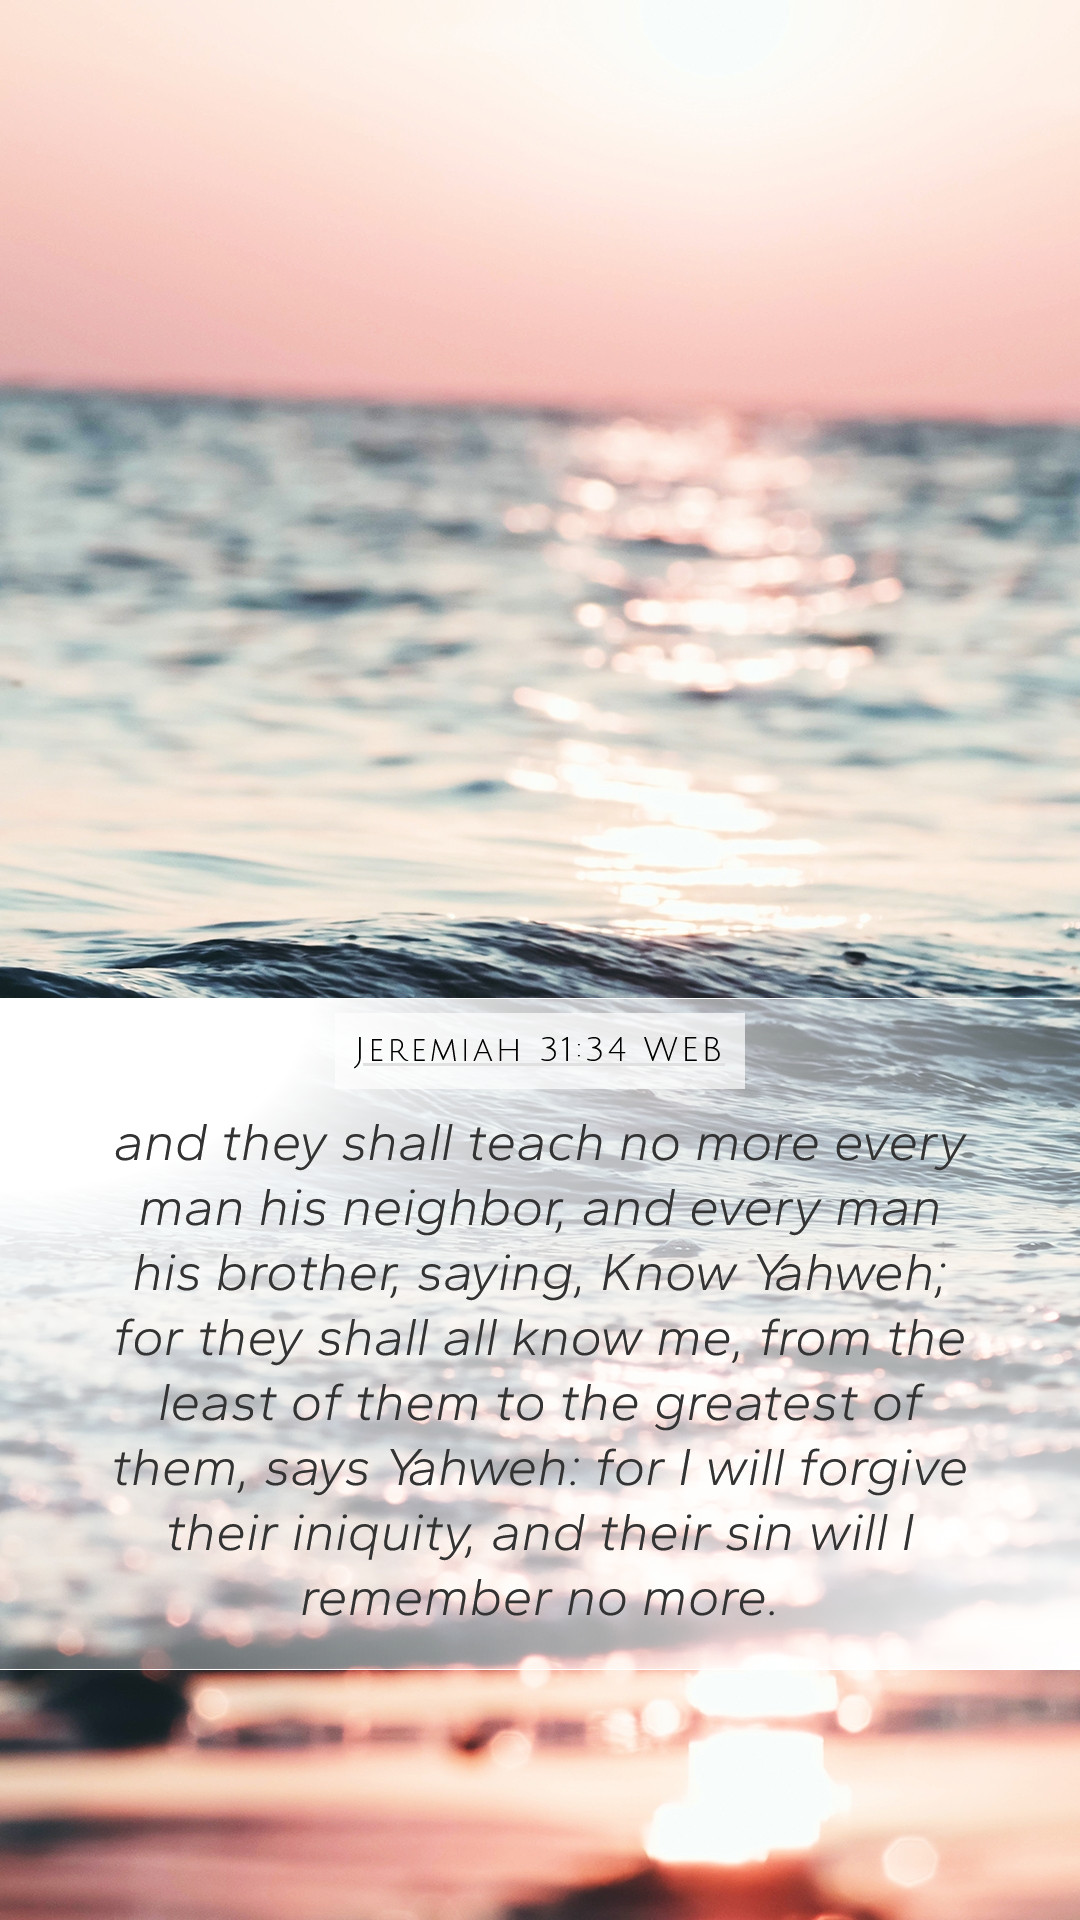 Jeremiah 31:34 on a sunset background with the ocean in the foreground. - Ocean